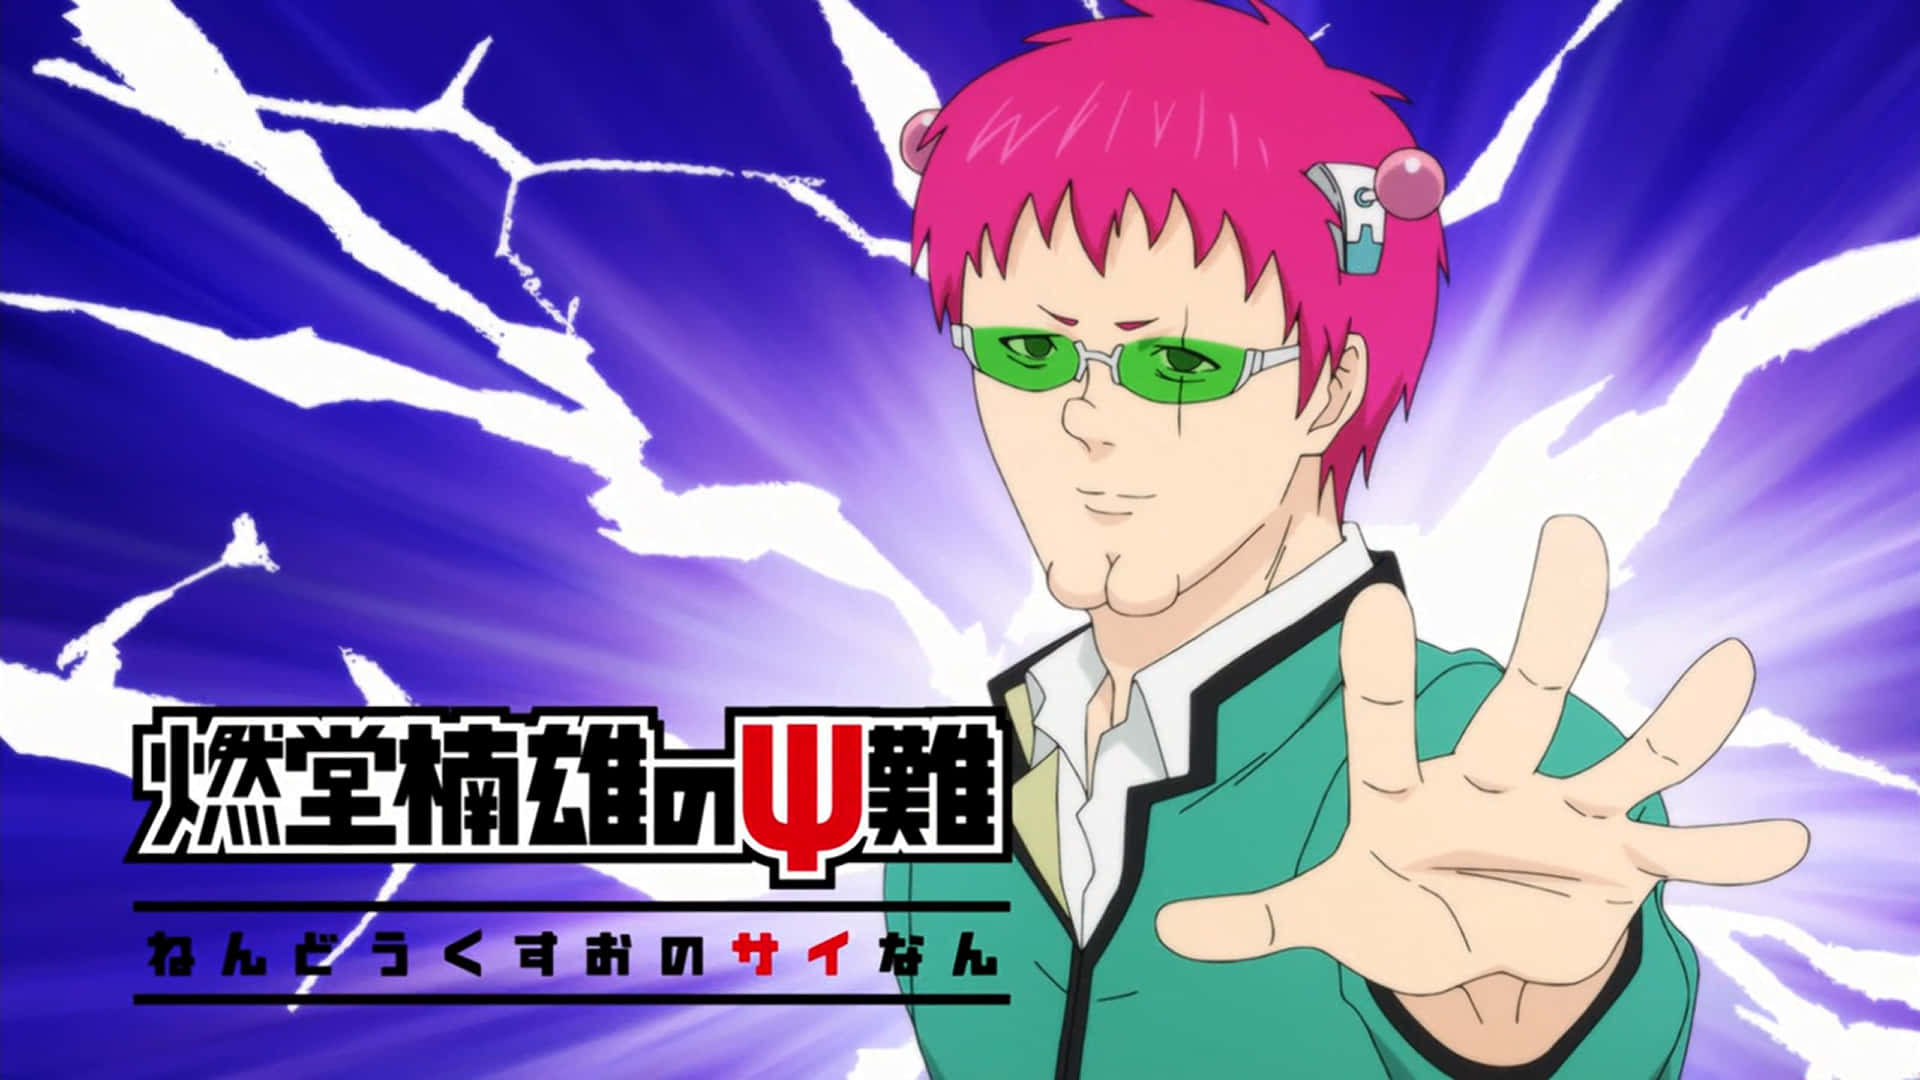 Saiki Kusuo ready to tap into his psychic powers Wallpaper